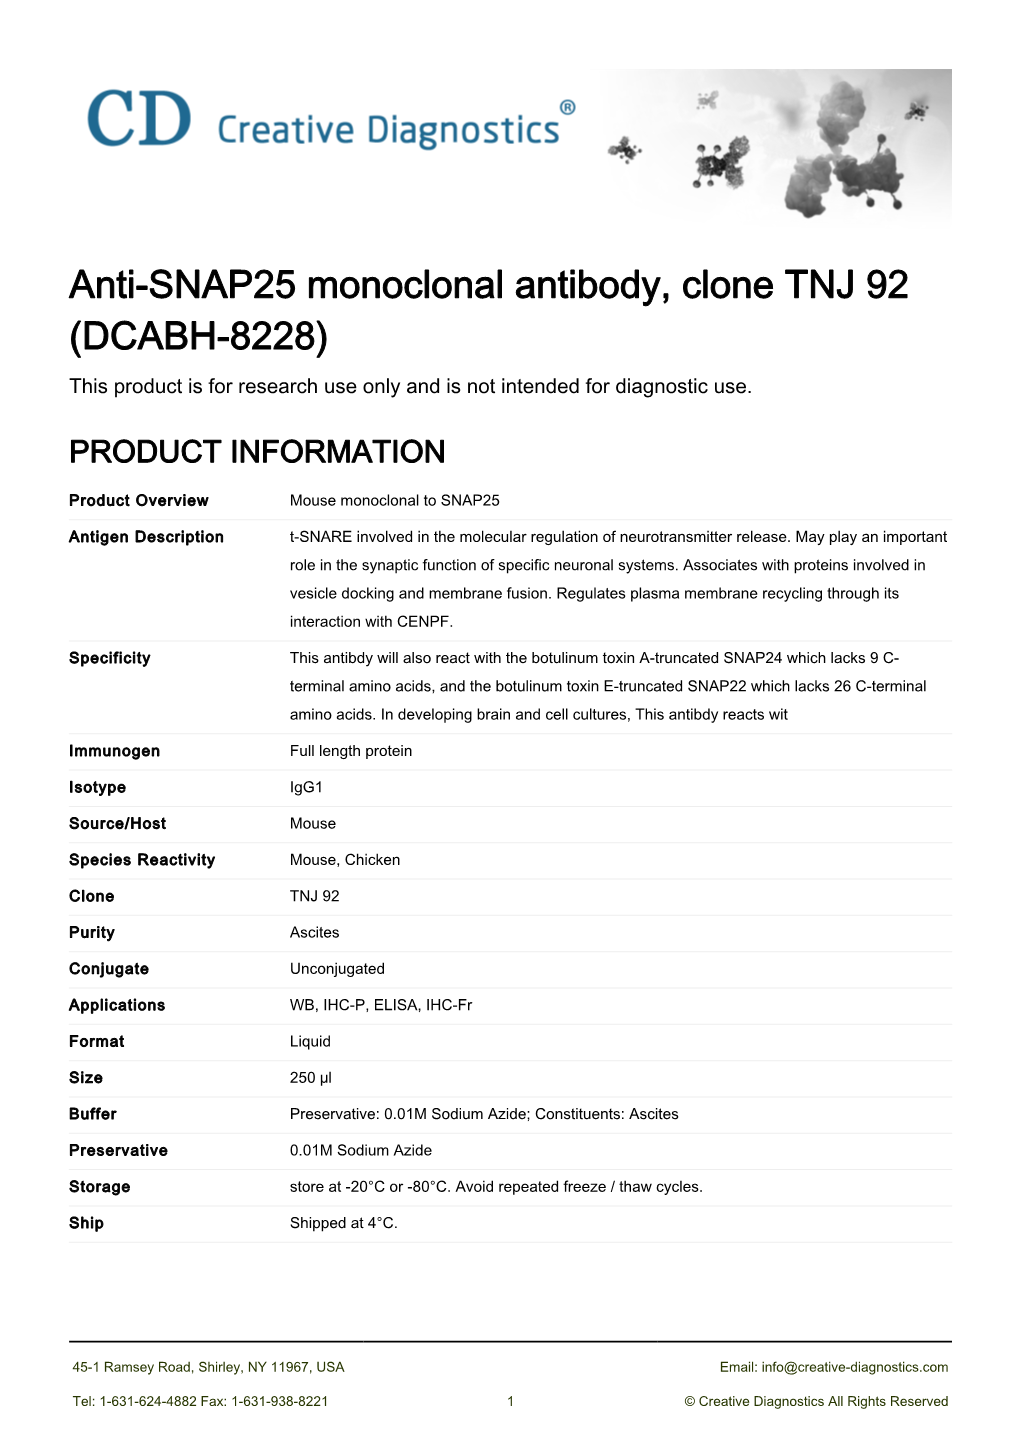 Anti-SNAP25 Monoclonal Antibody, Clone TNJ 92 (DCABH-8228) This Product Is for Research Use Only and Is Not Intended for Diagnostic Use